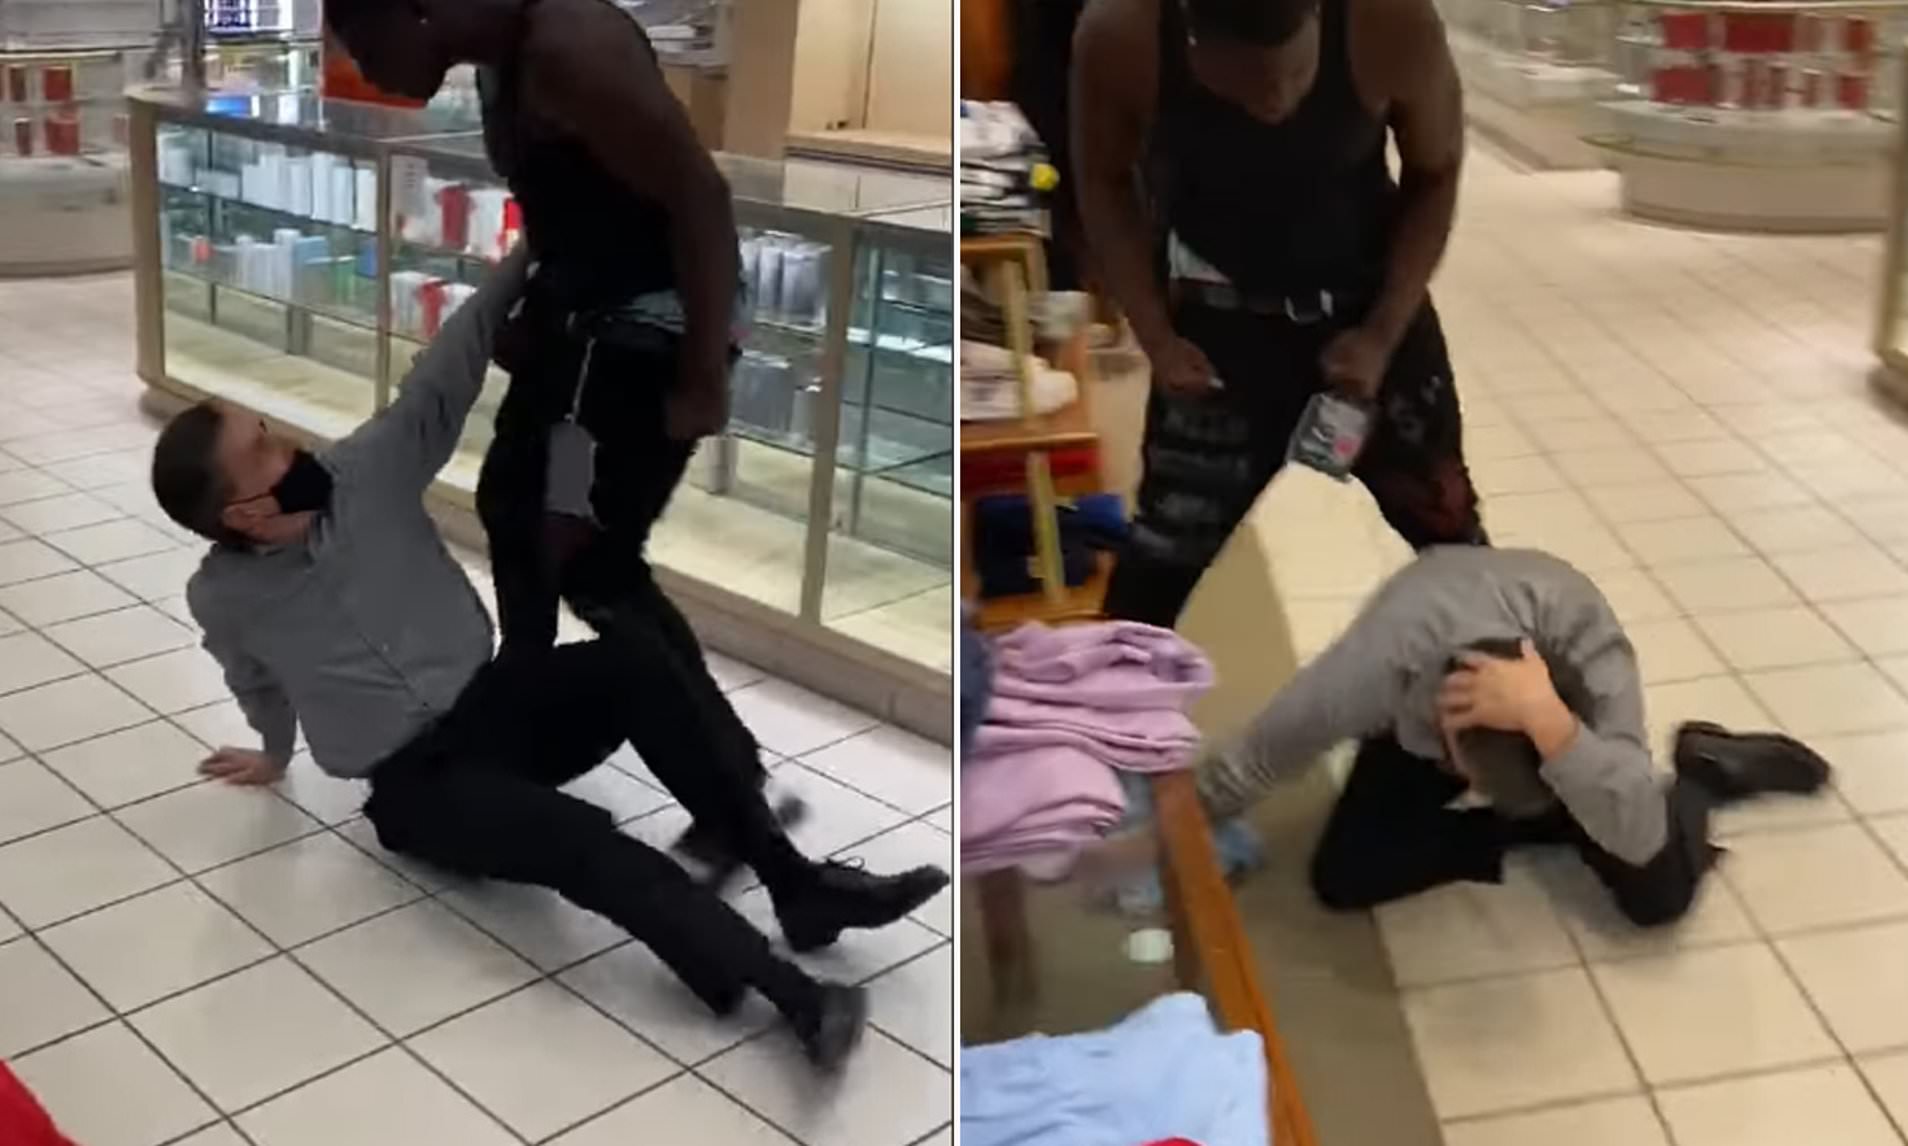 Damire Canell Palmer was caught on video assaulting Macy's manager in Michigan